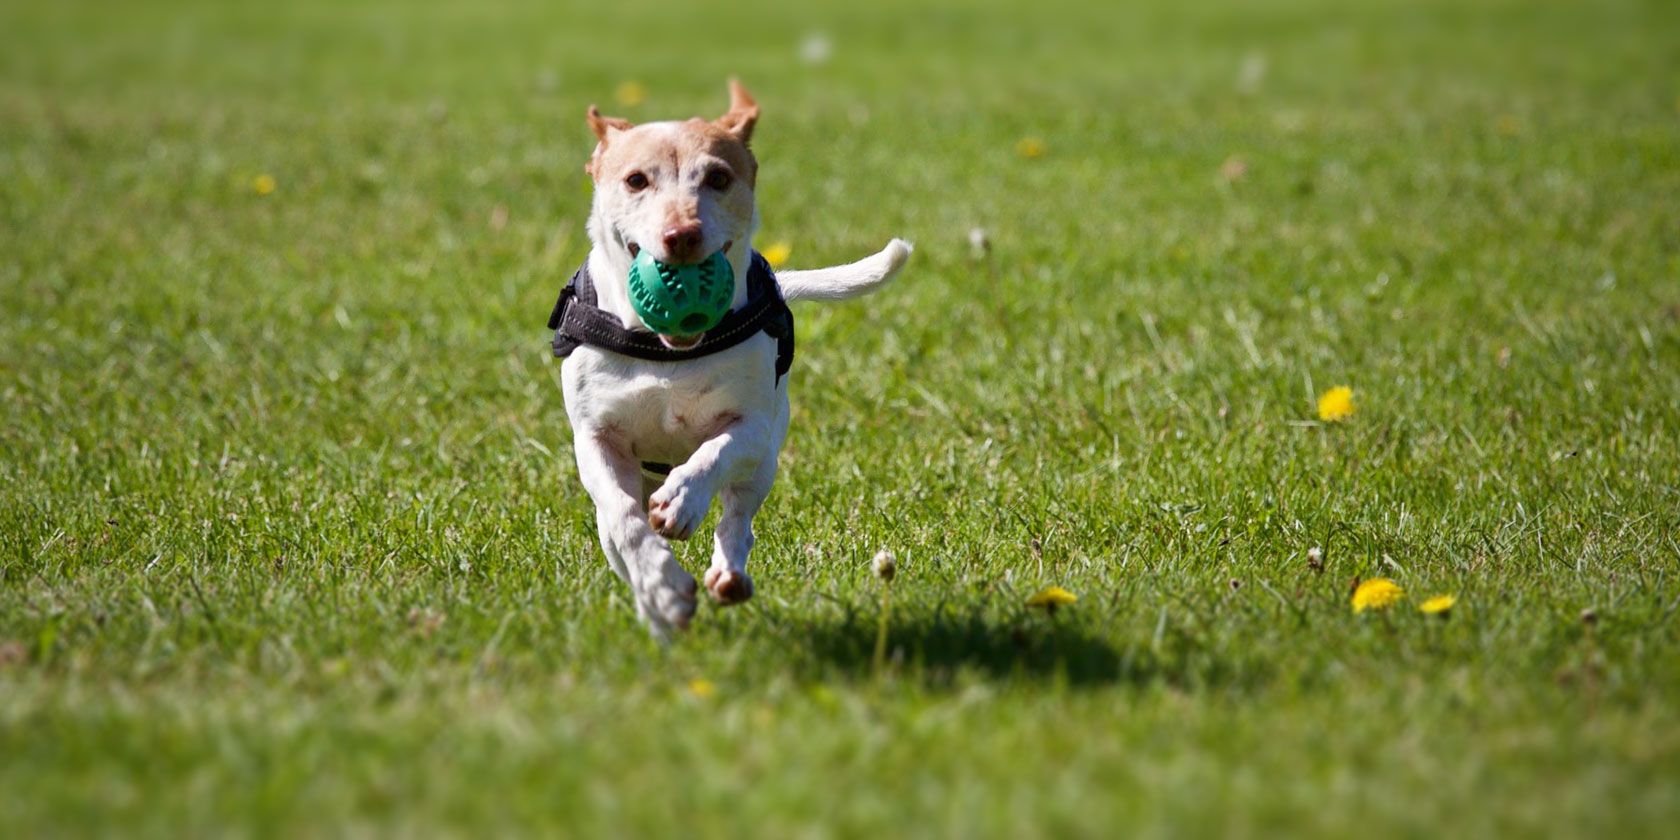 The 5 Best Free Online Dog Training Courses to Teach Your